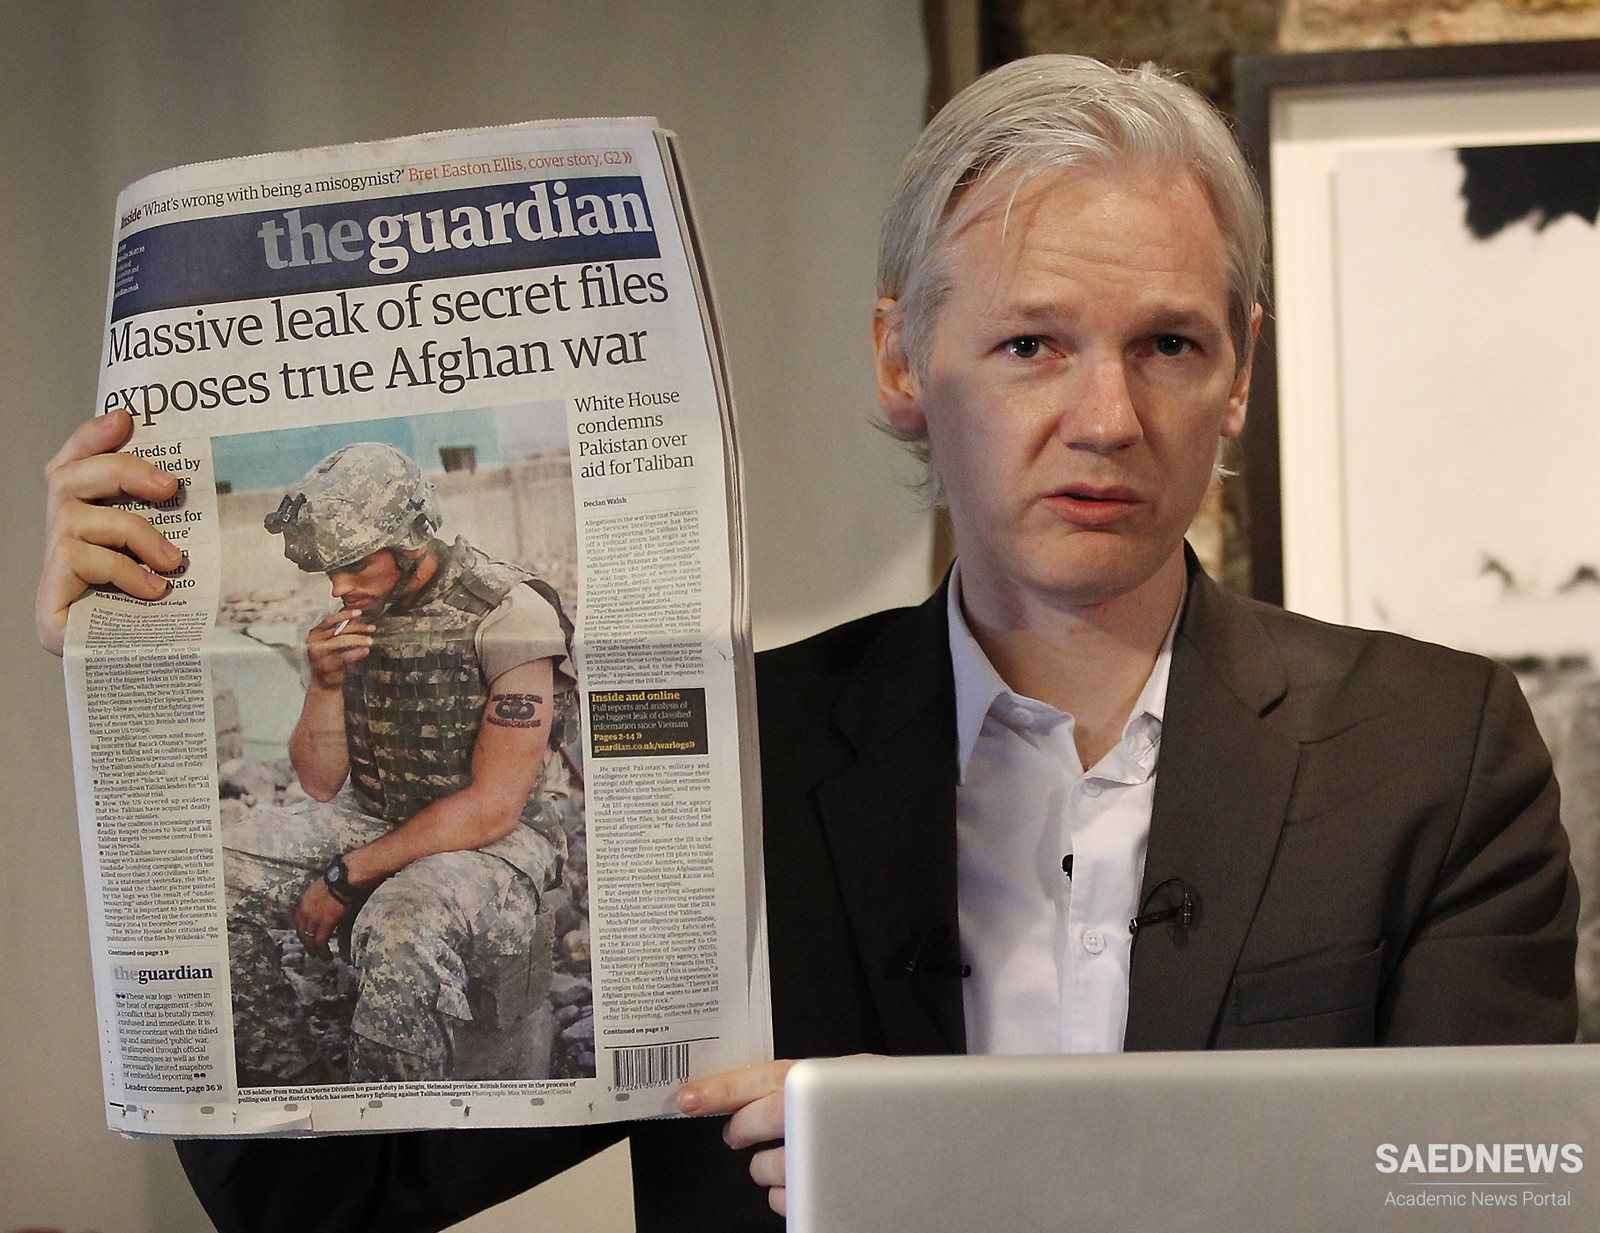 Julian Assange Will Stay in Prison under Tight Security Conditions Following the Denial of His Bail